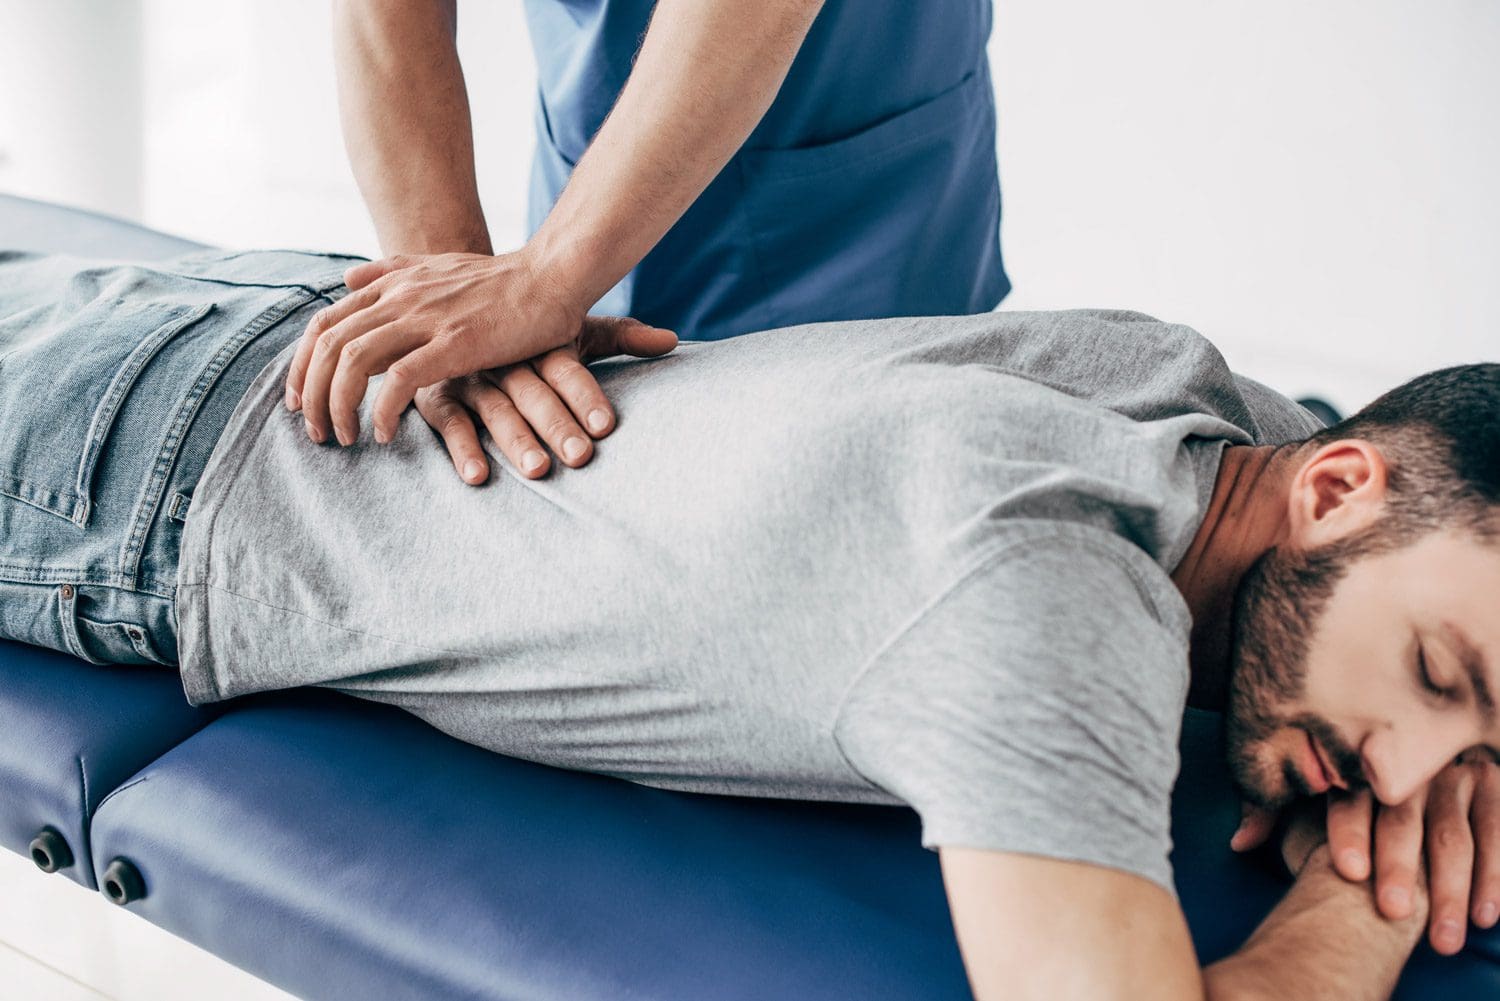 A Vancouver Chiropractor administers a back adjustment on a male patient.